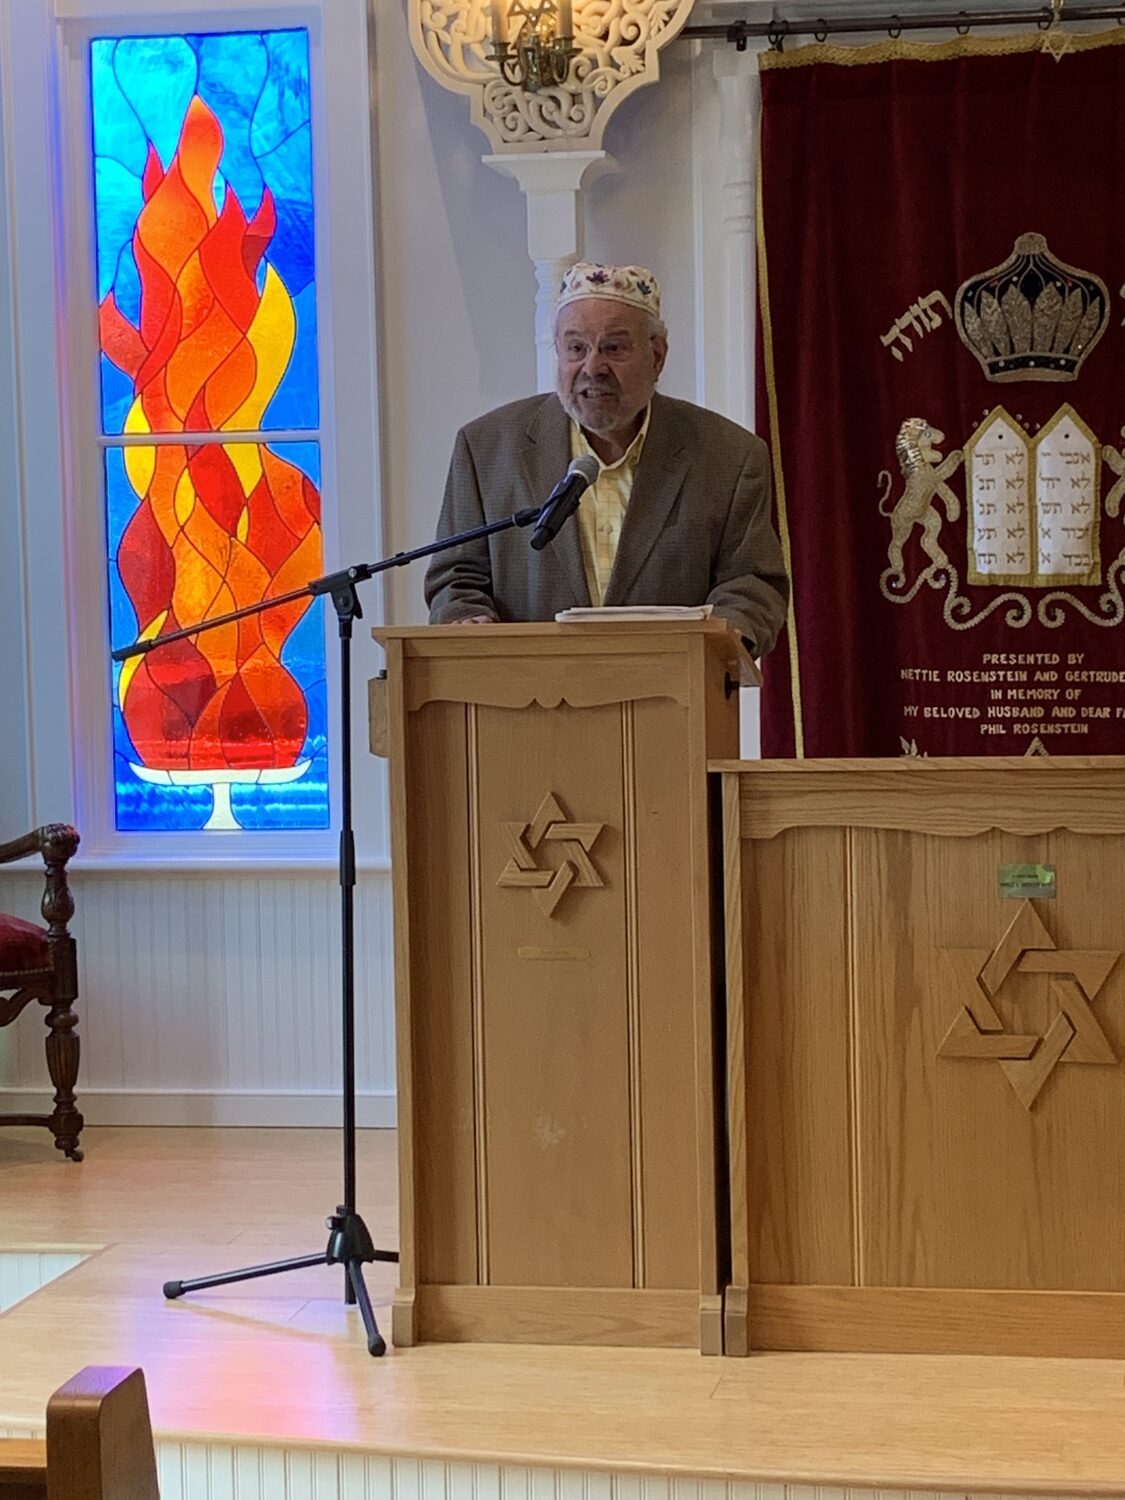 Journalist Karl Grossman discussed the history of Jews on the East End at a program at Temple Adas Israel sponsored by the Sag Harbor Historical Museum. STEPHEN J. KOTZ